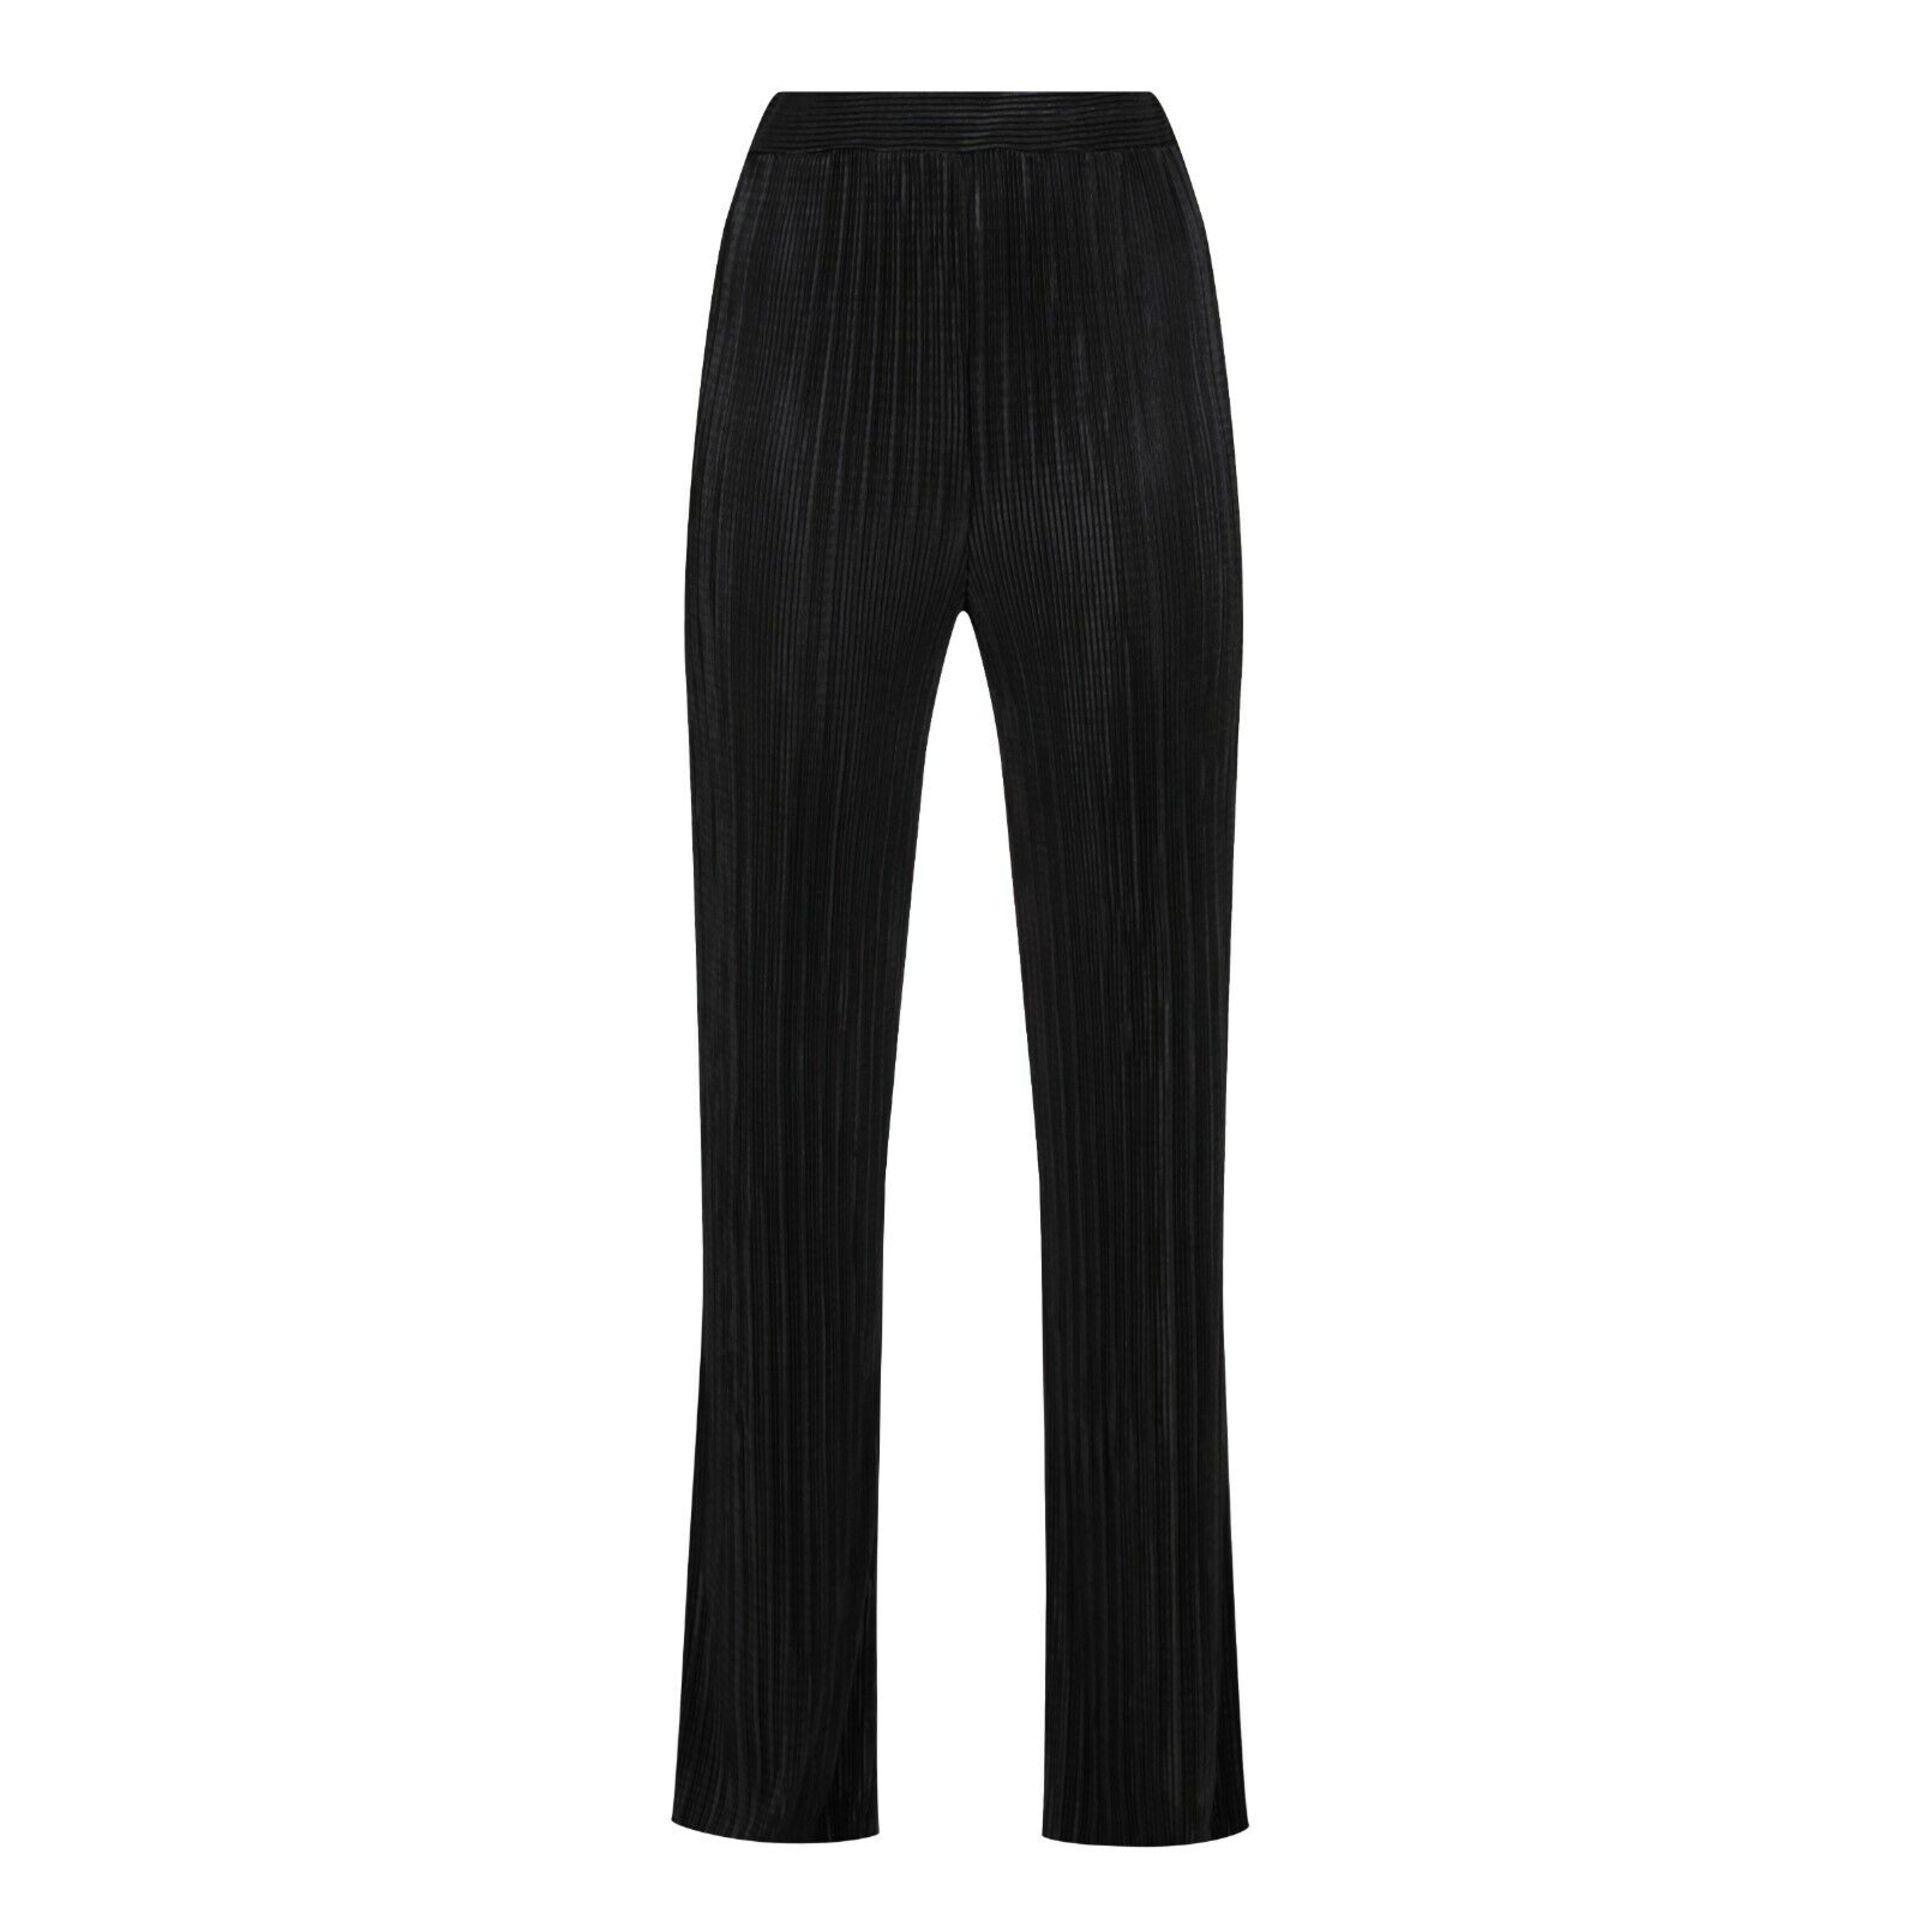 30 x New Women's Skirts Trousers Clothing Fashion - Image 3 of 8